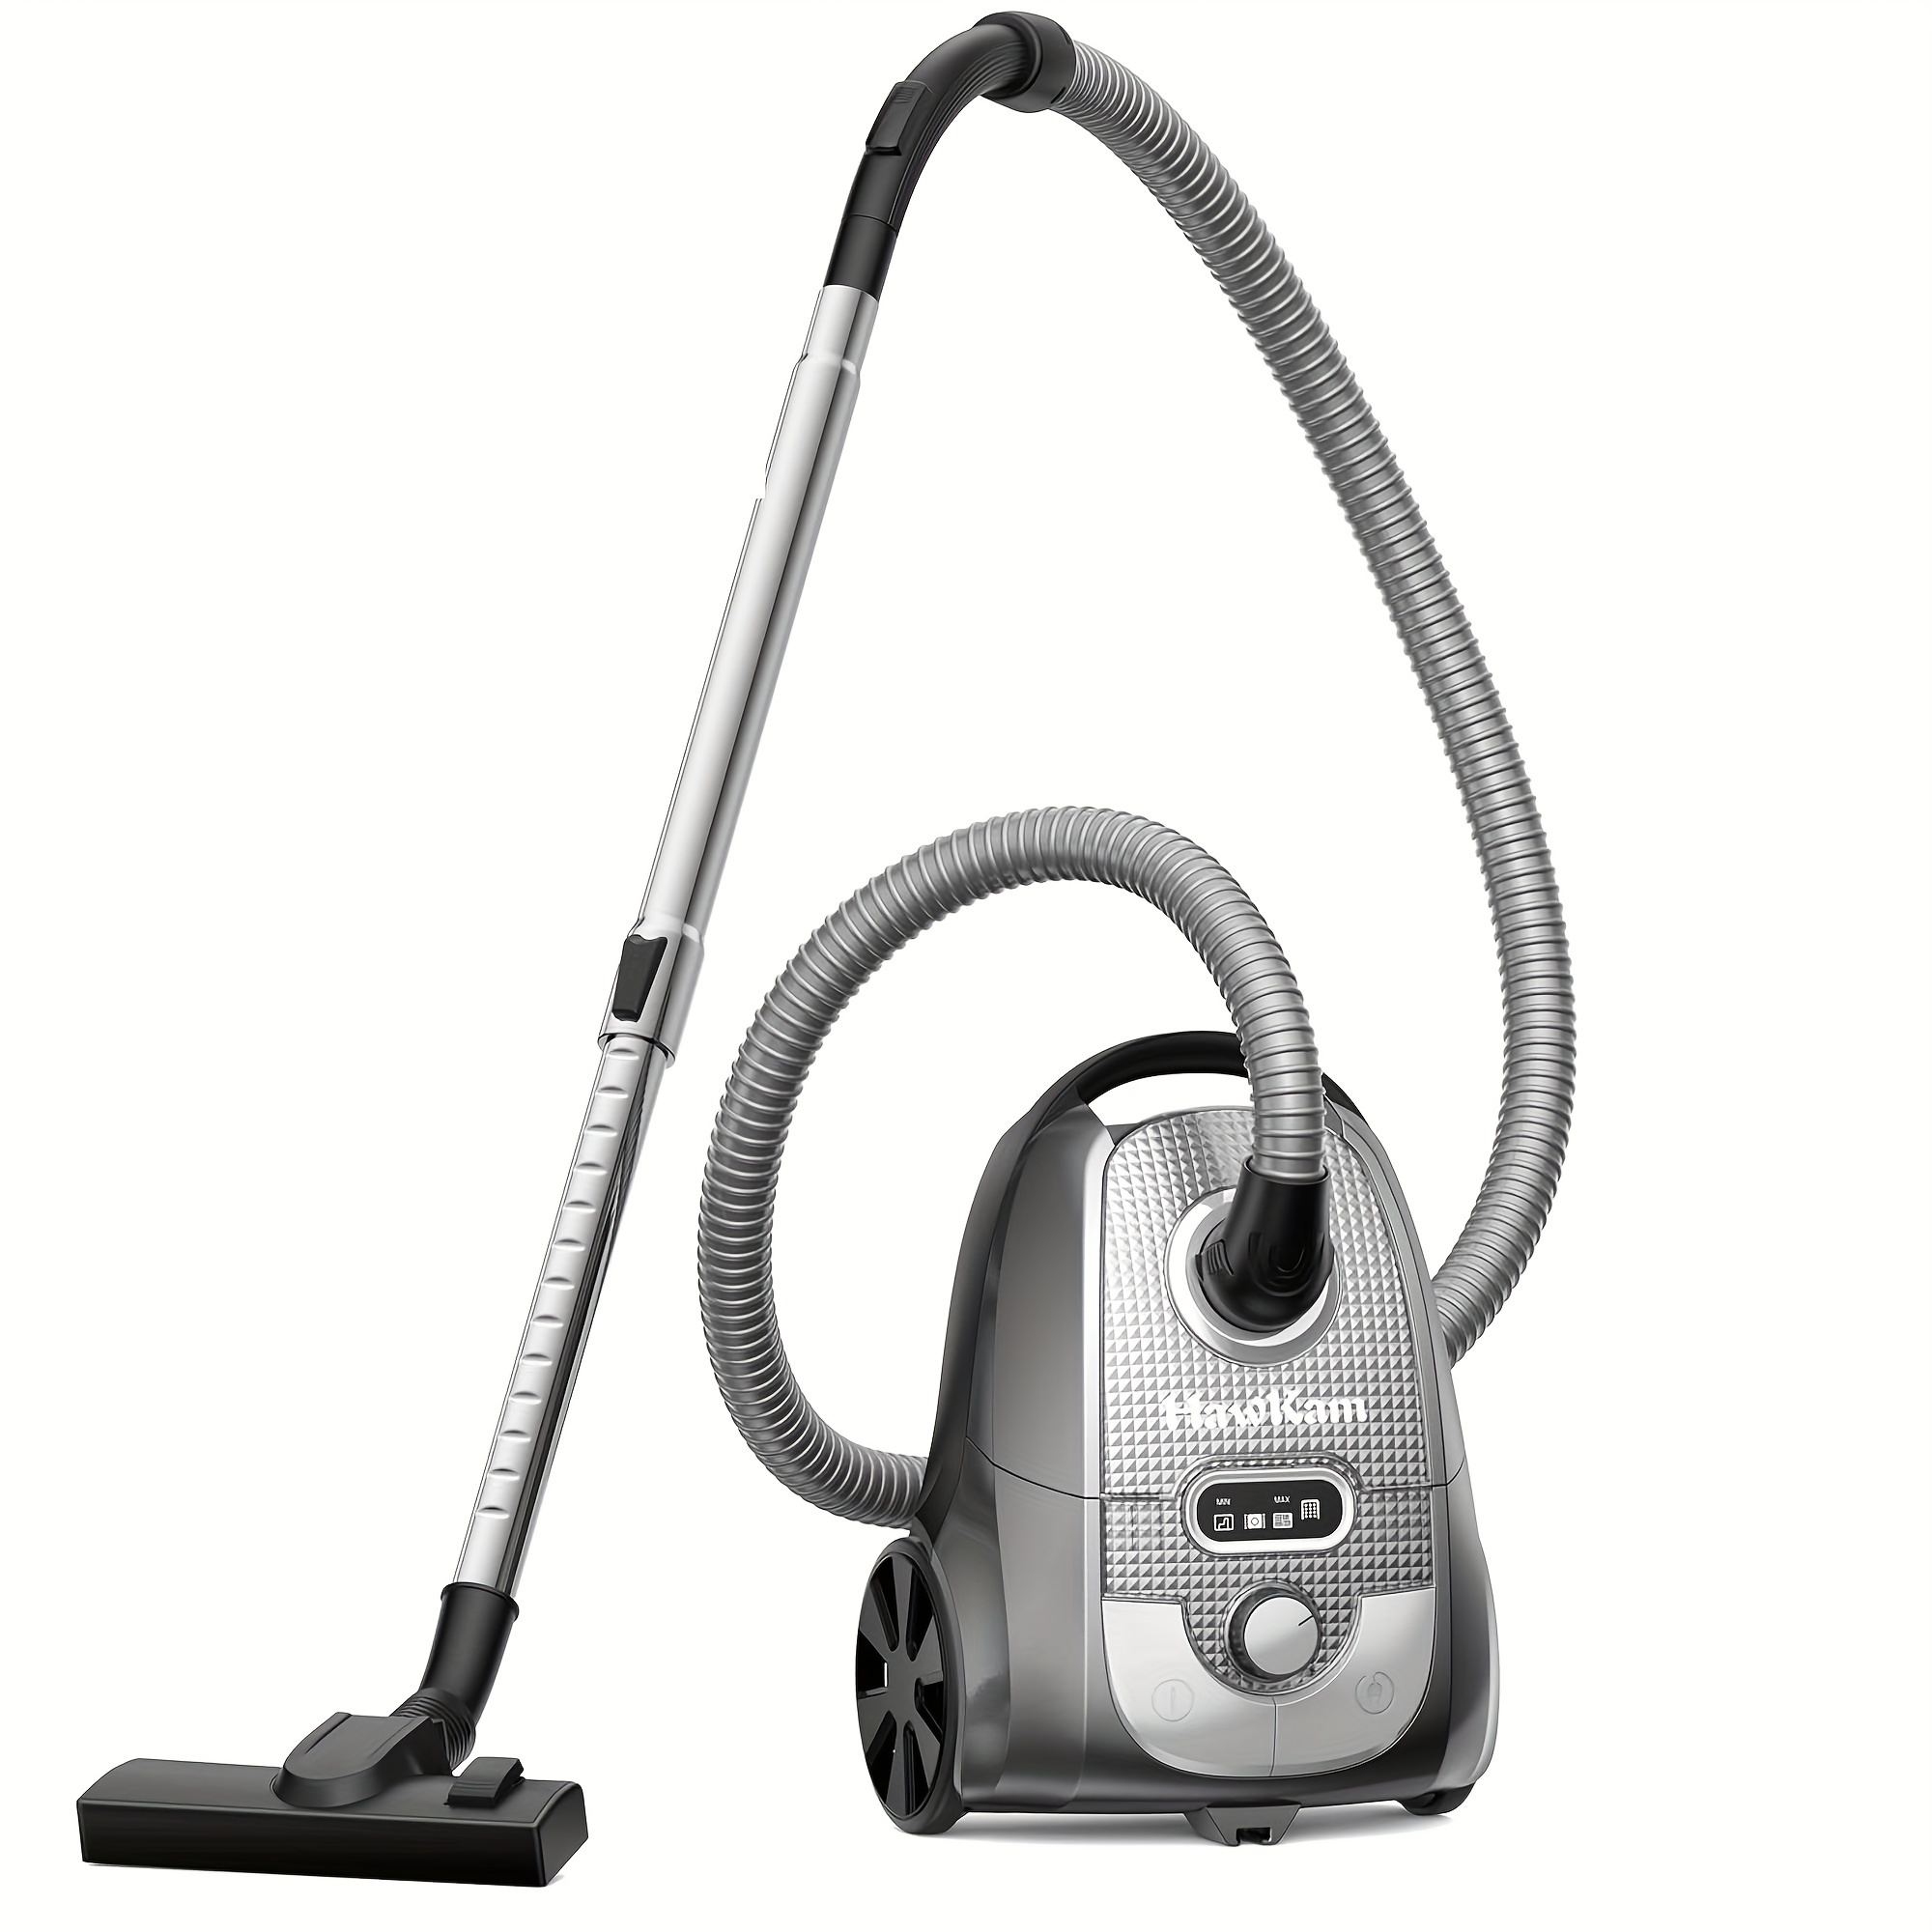 

1300w Bagged Canister Vacuum Cleaner For Home - Powerful Suction, Lightweight And Corded With 4 Attachments And 6 Bags - Ideal For Hard Floors, Carpets, Pets, Upholstery, Tiles, And Cars Hk-ca002